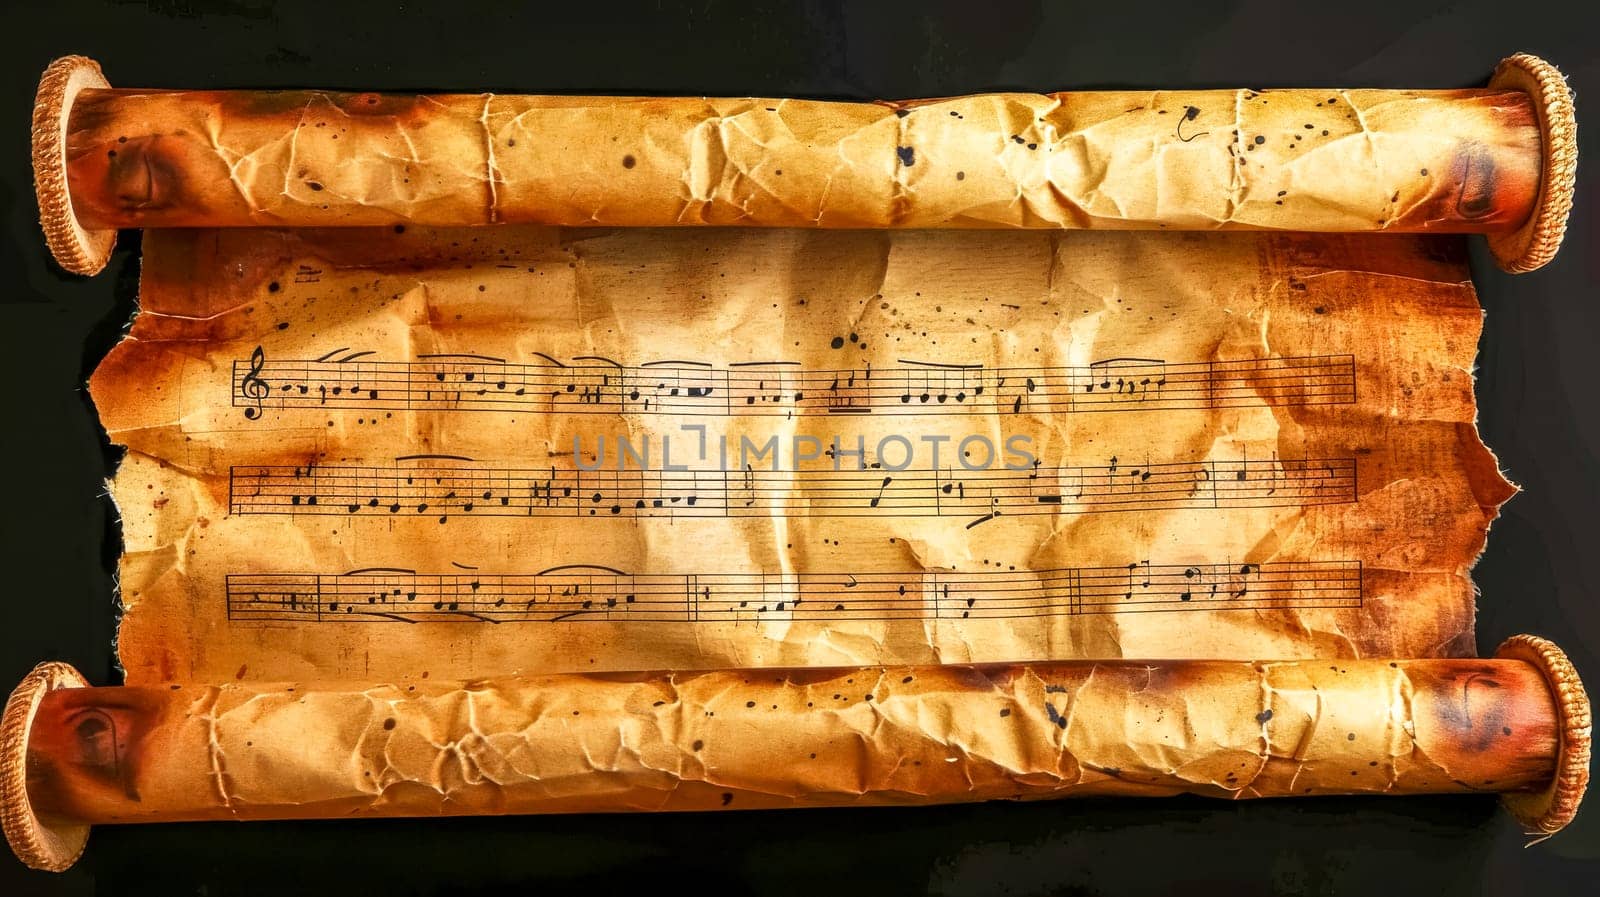 Ancient music scroll with notes by Edophoto